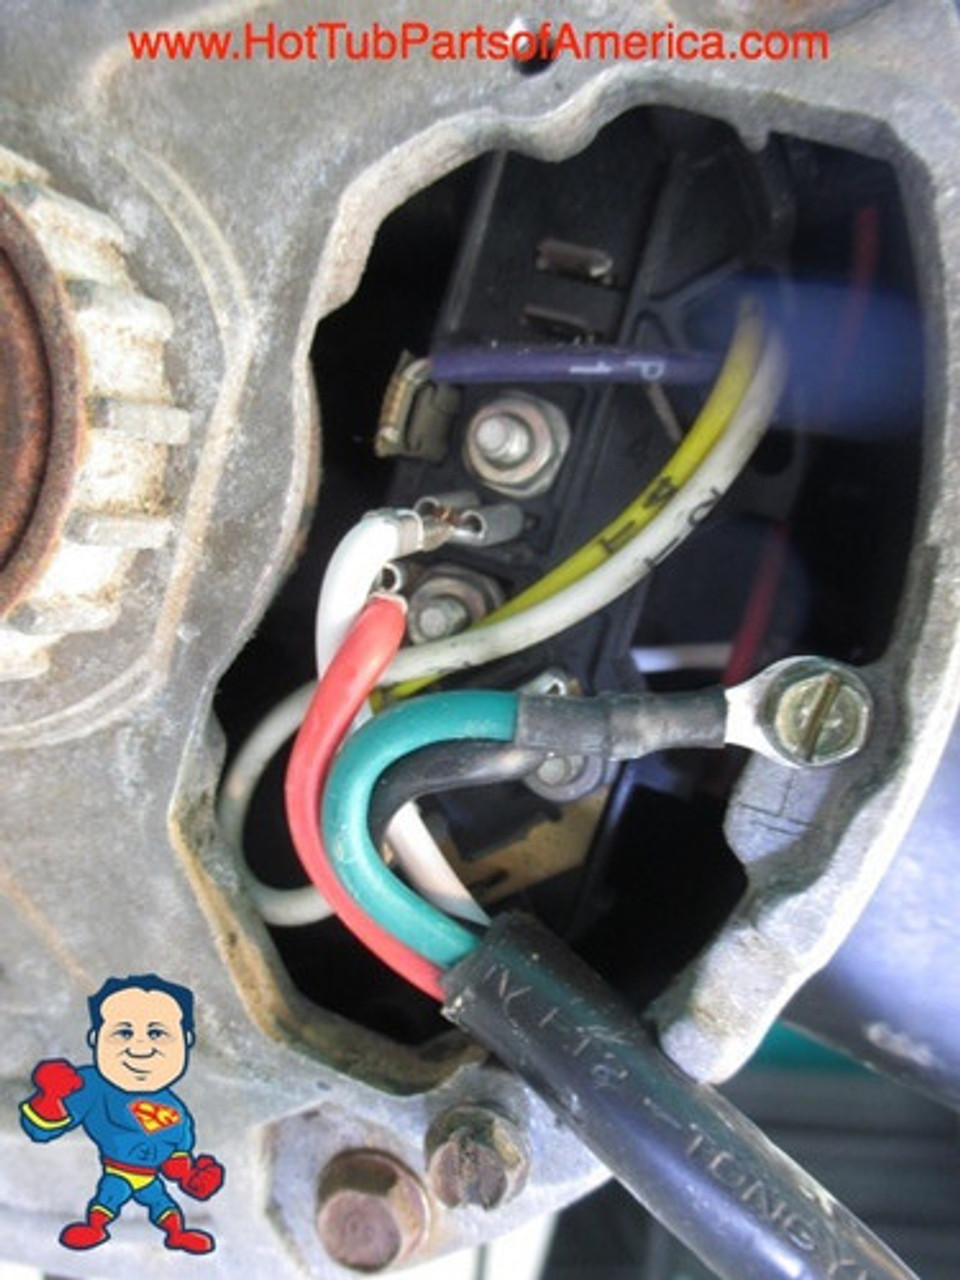 An Example of a 230V (2) Speed GE motor wiring on the Motor End:
Low Speed Black wire goes on (2)
High Speed Red Wire goes on (3) 
Common or Neutral White Wires goes on (1) Note: In this case this wire would be Hot 115V..
Green goes on 1/4" Screw to the body cover...
Pay no attention to the colors they show by the speeds...